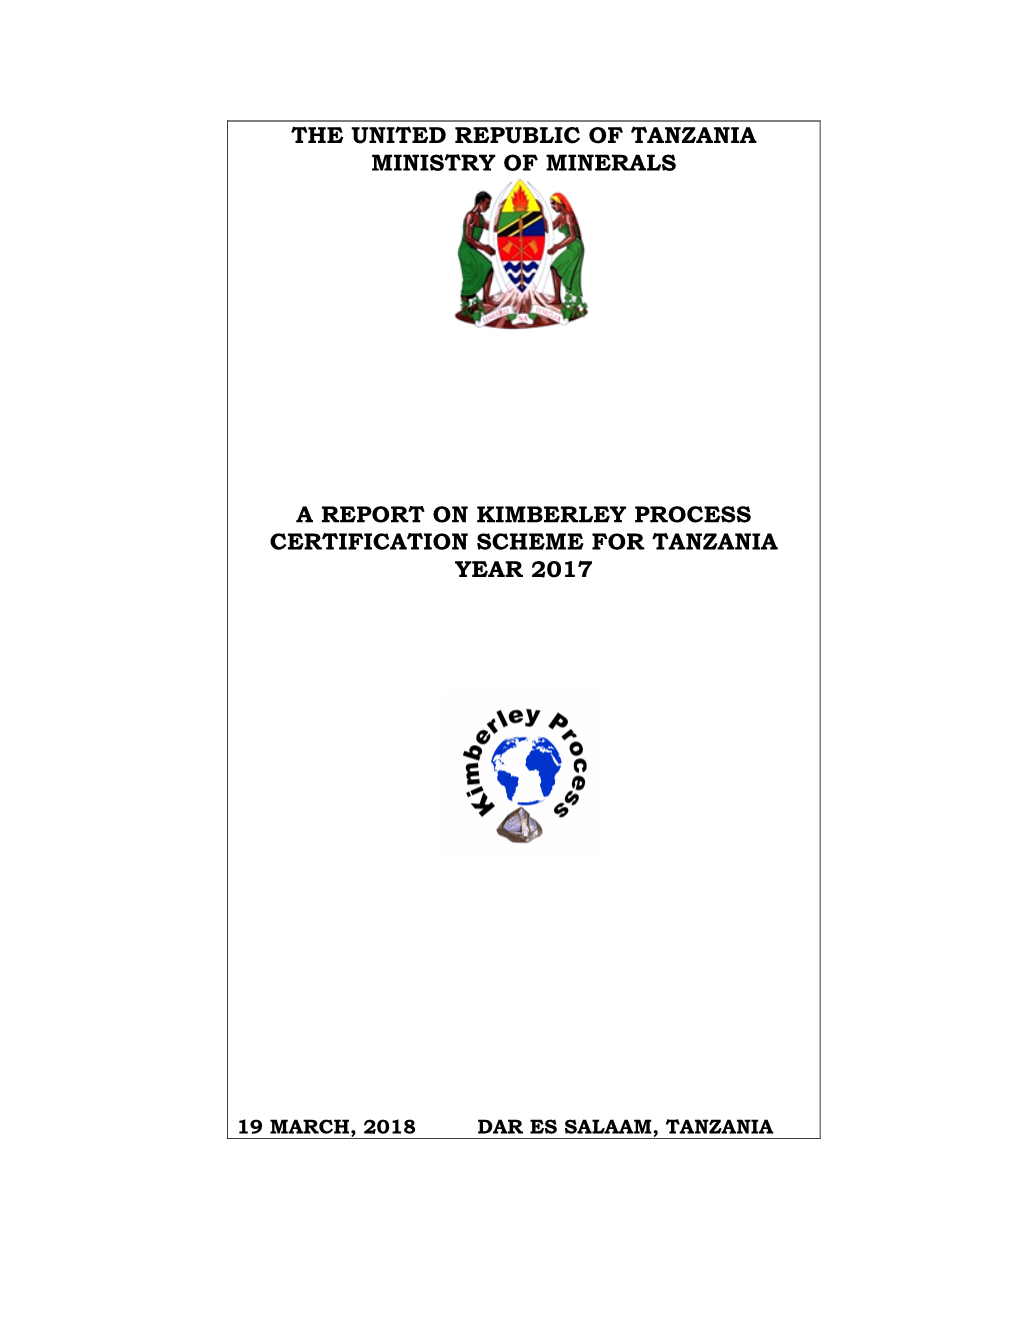 The United Republic of Tanzania Ministry of Minerals a Report on Kimberley